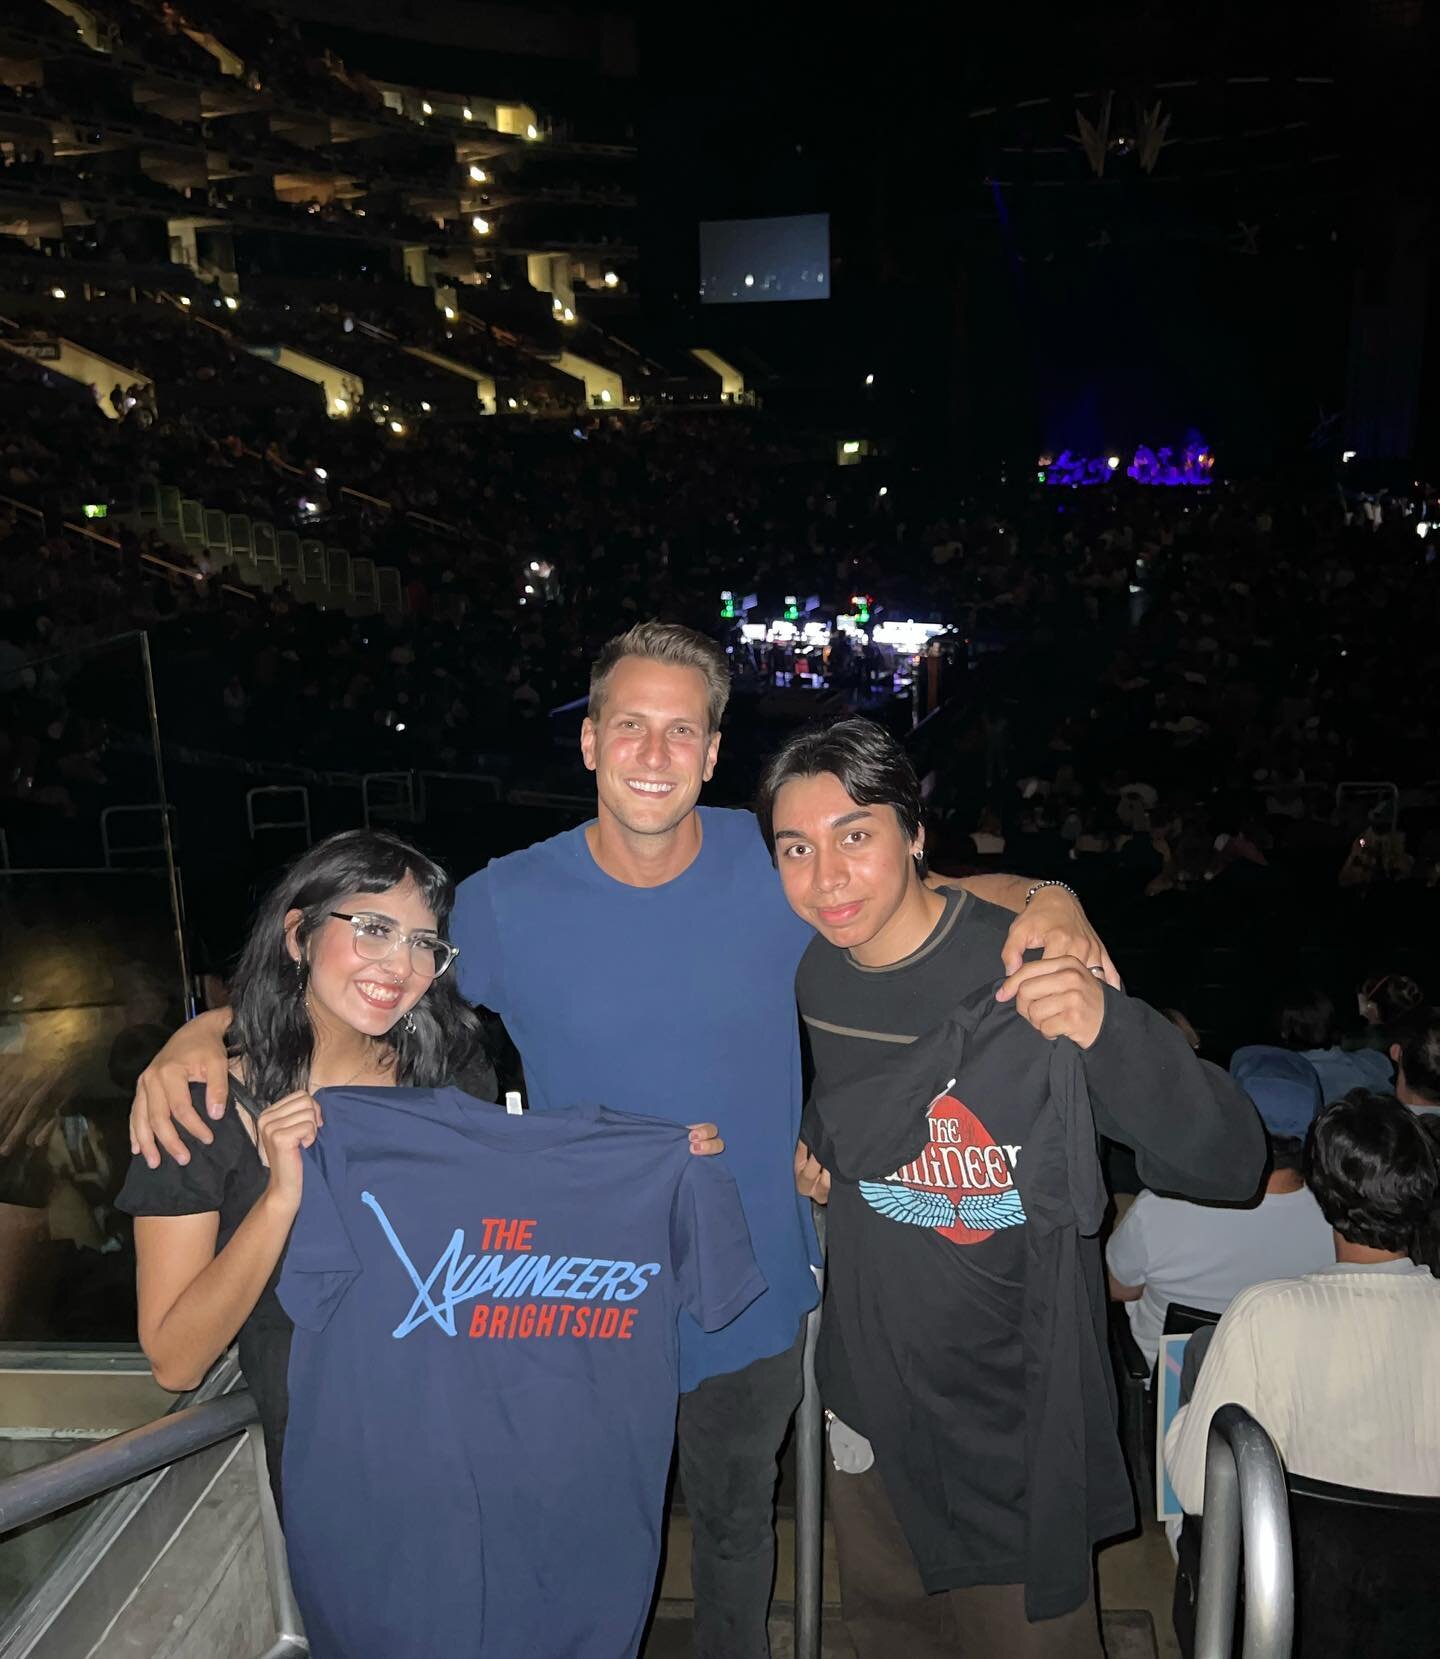 SURPRISE SEAT UPGRADE!! We moved Andrew &amp; Daisy from the last row to the 18th for @thelumineers #brightsidetour last night @cryptocomarena 

#theconcertedeffort #givingback #community #family #lumineers #crypto